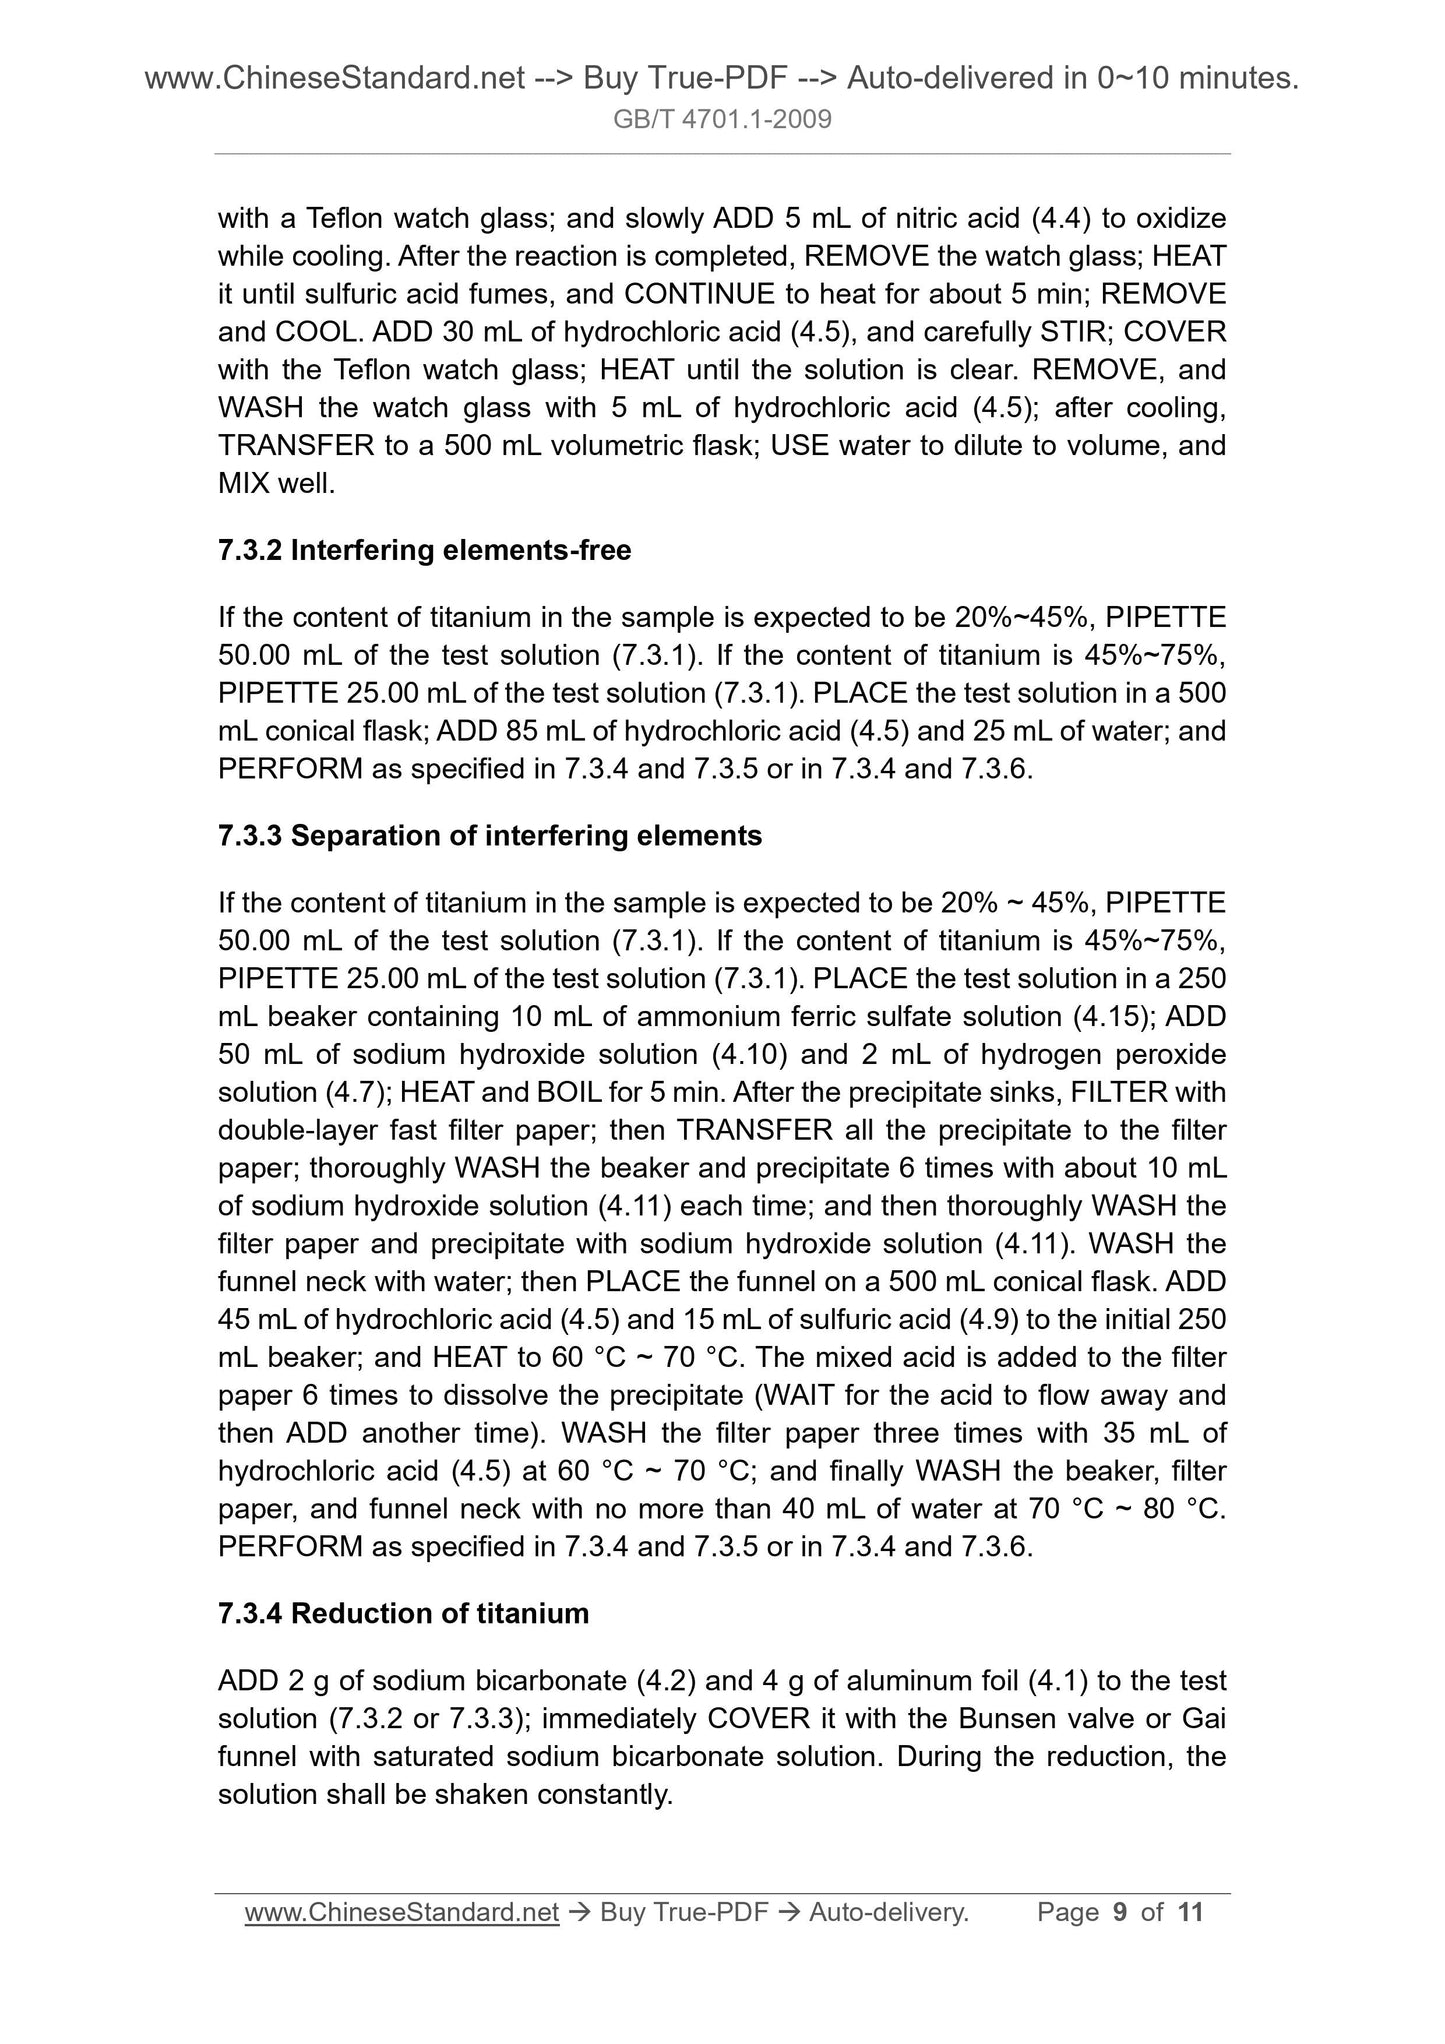 GB/T 4701.1-2009 Page 5